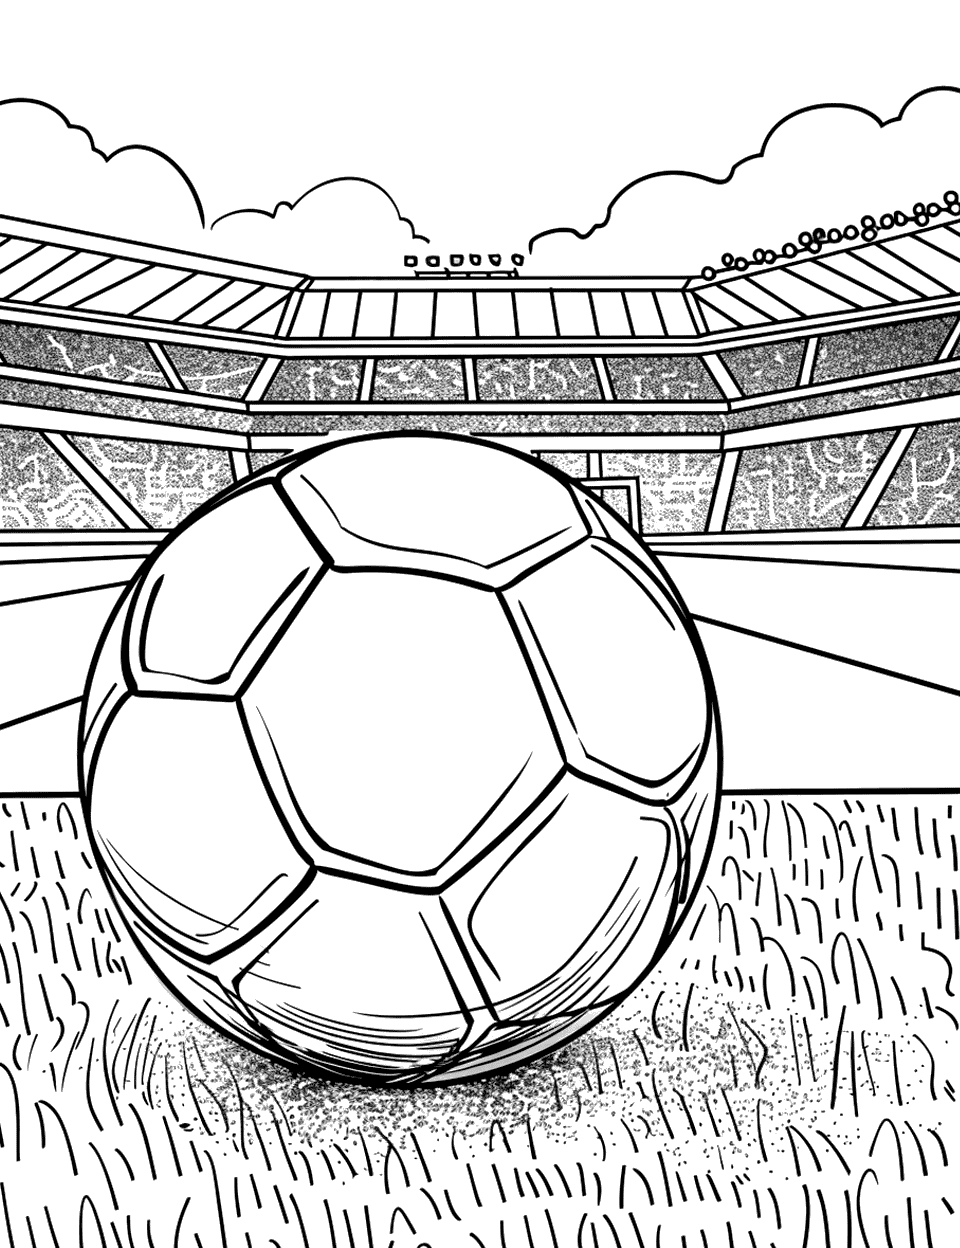 Soccer Ball on the Field Coloring Page - A close-up of a soccer ball on the field, with the stadium in the background.